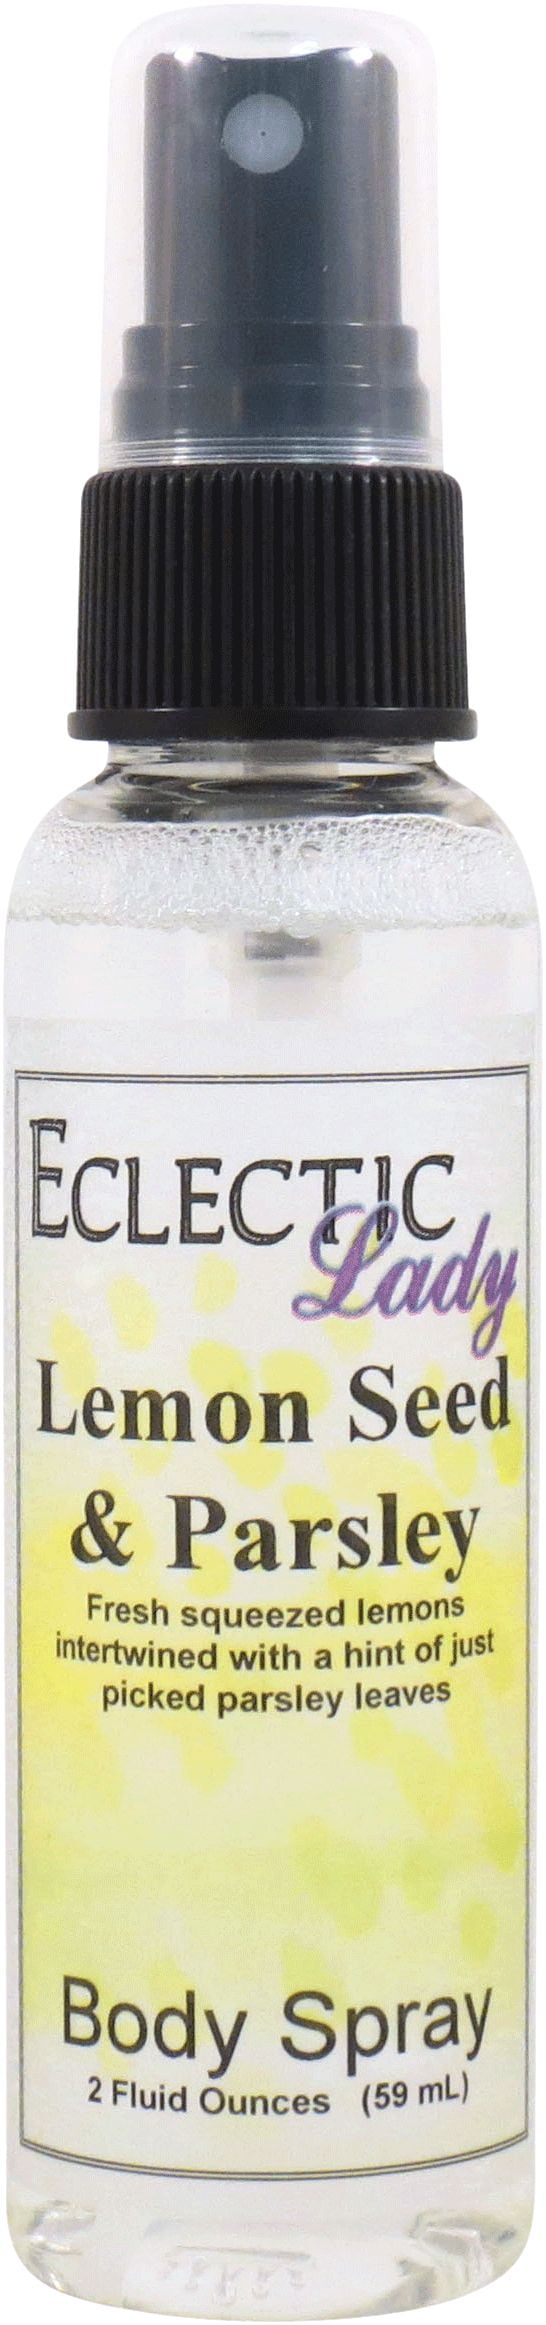 Lemon Seed and Parsley Body Spray, Eclectic Lady, Hydrating Mist ...